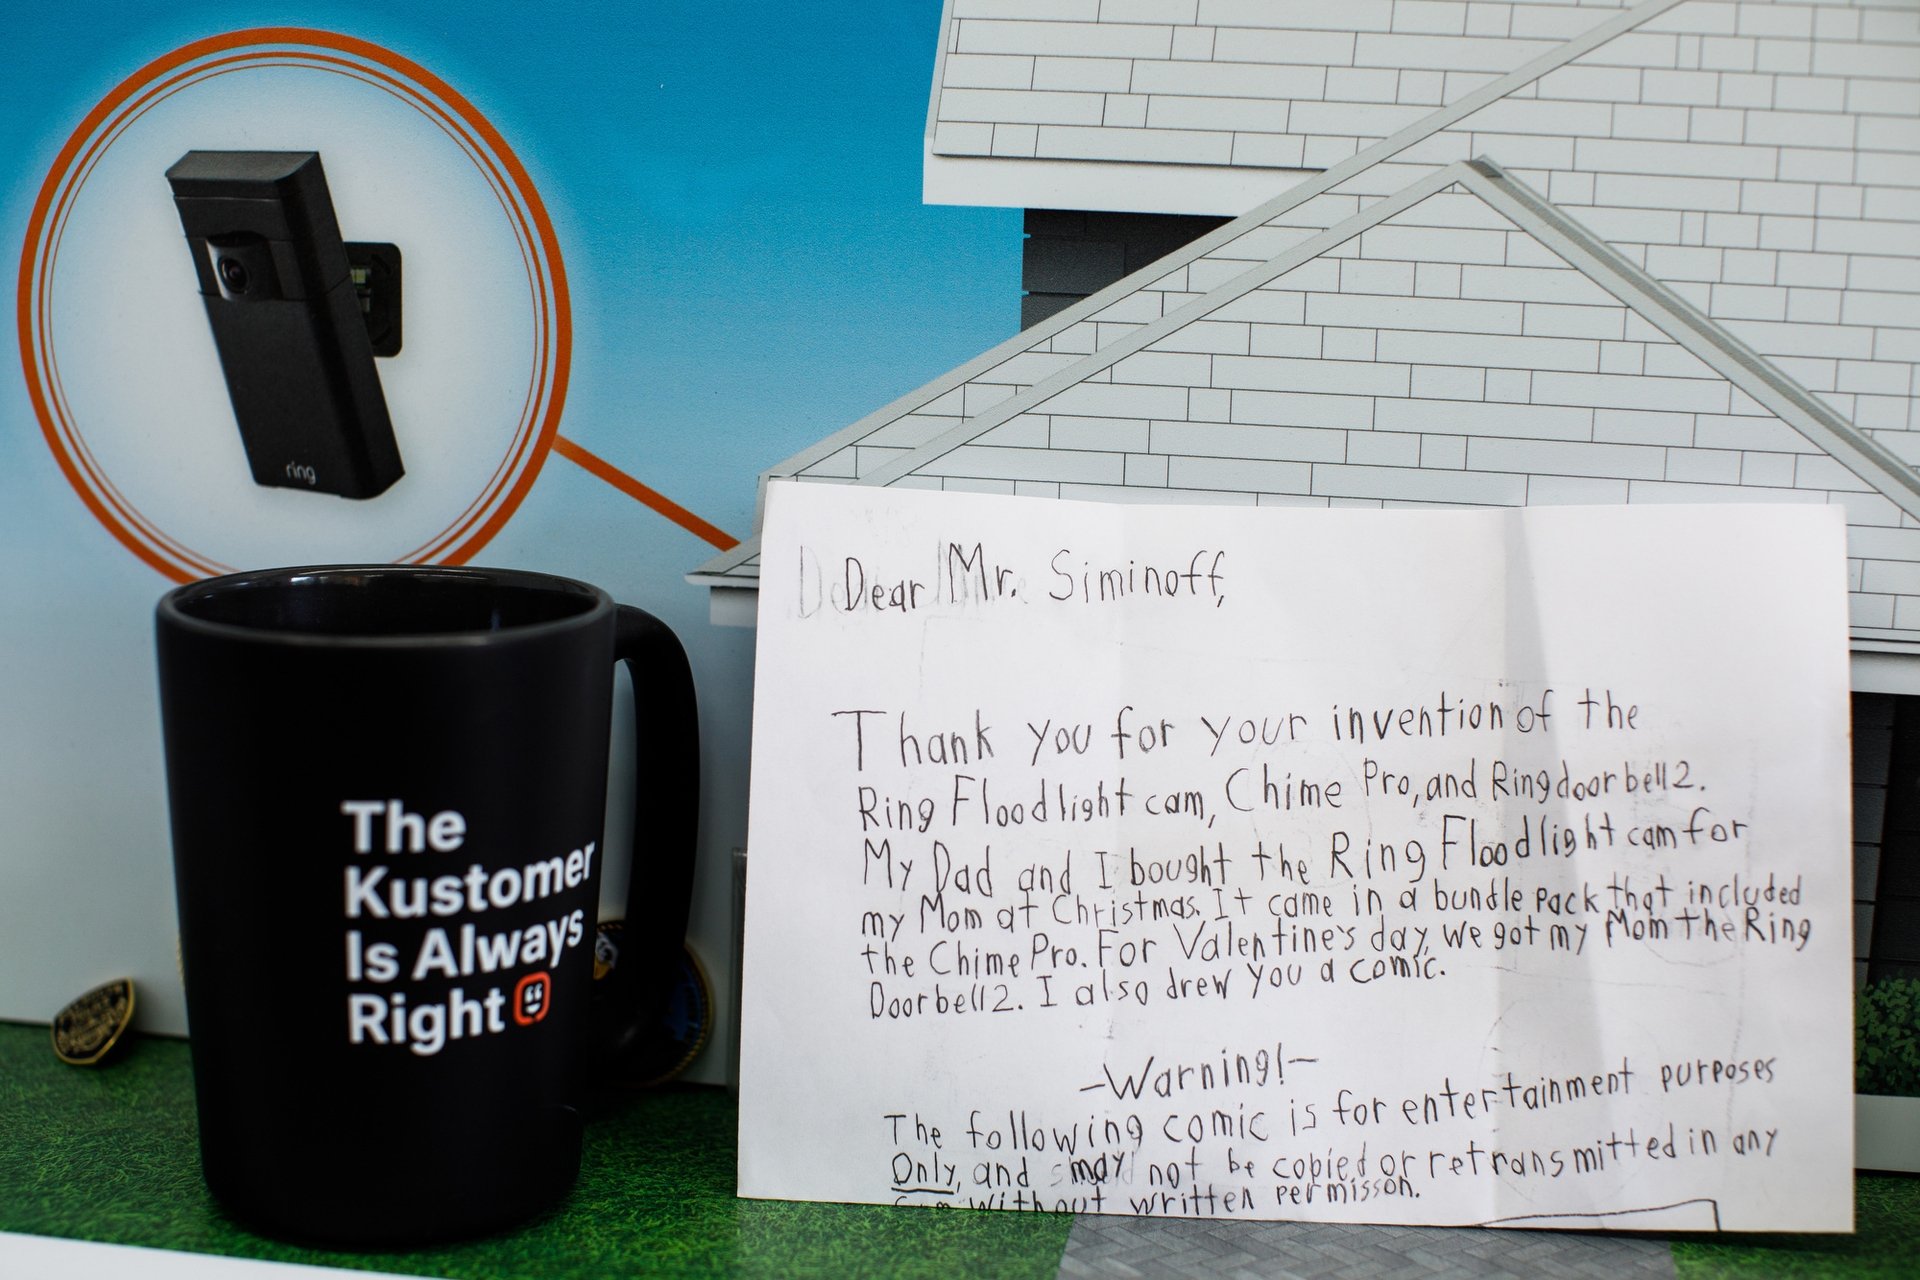 A child's letter to Ring founder Jamie Siminoff, which thanks him for inventing the Ring floodlight cam. 